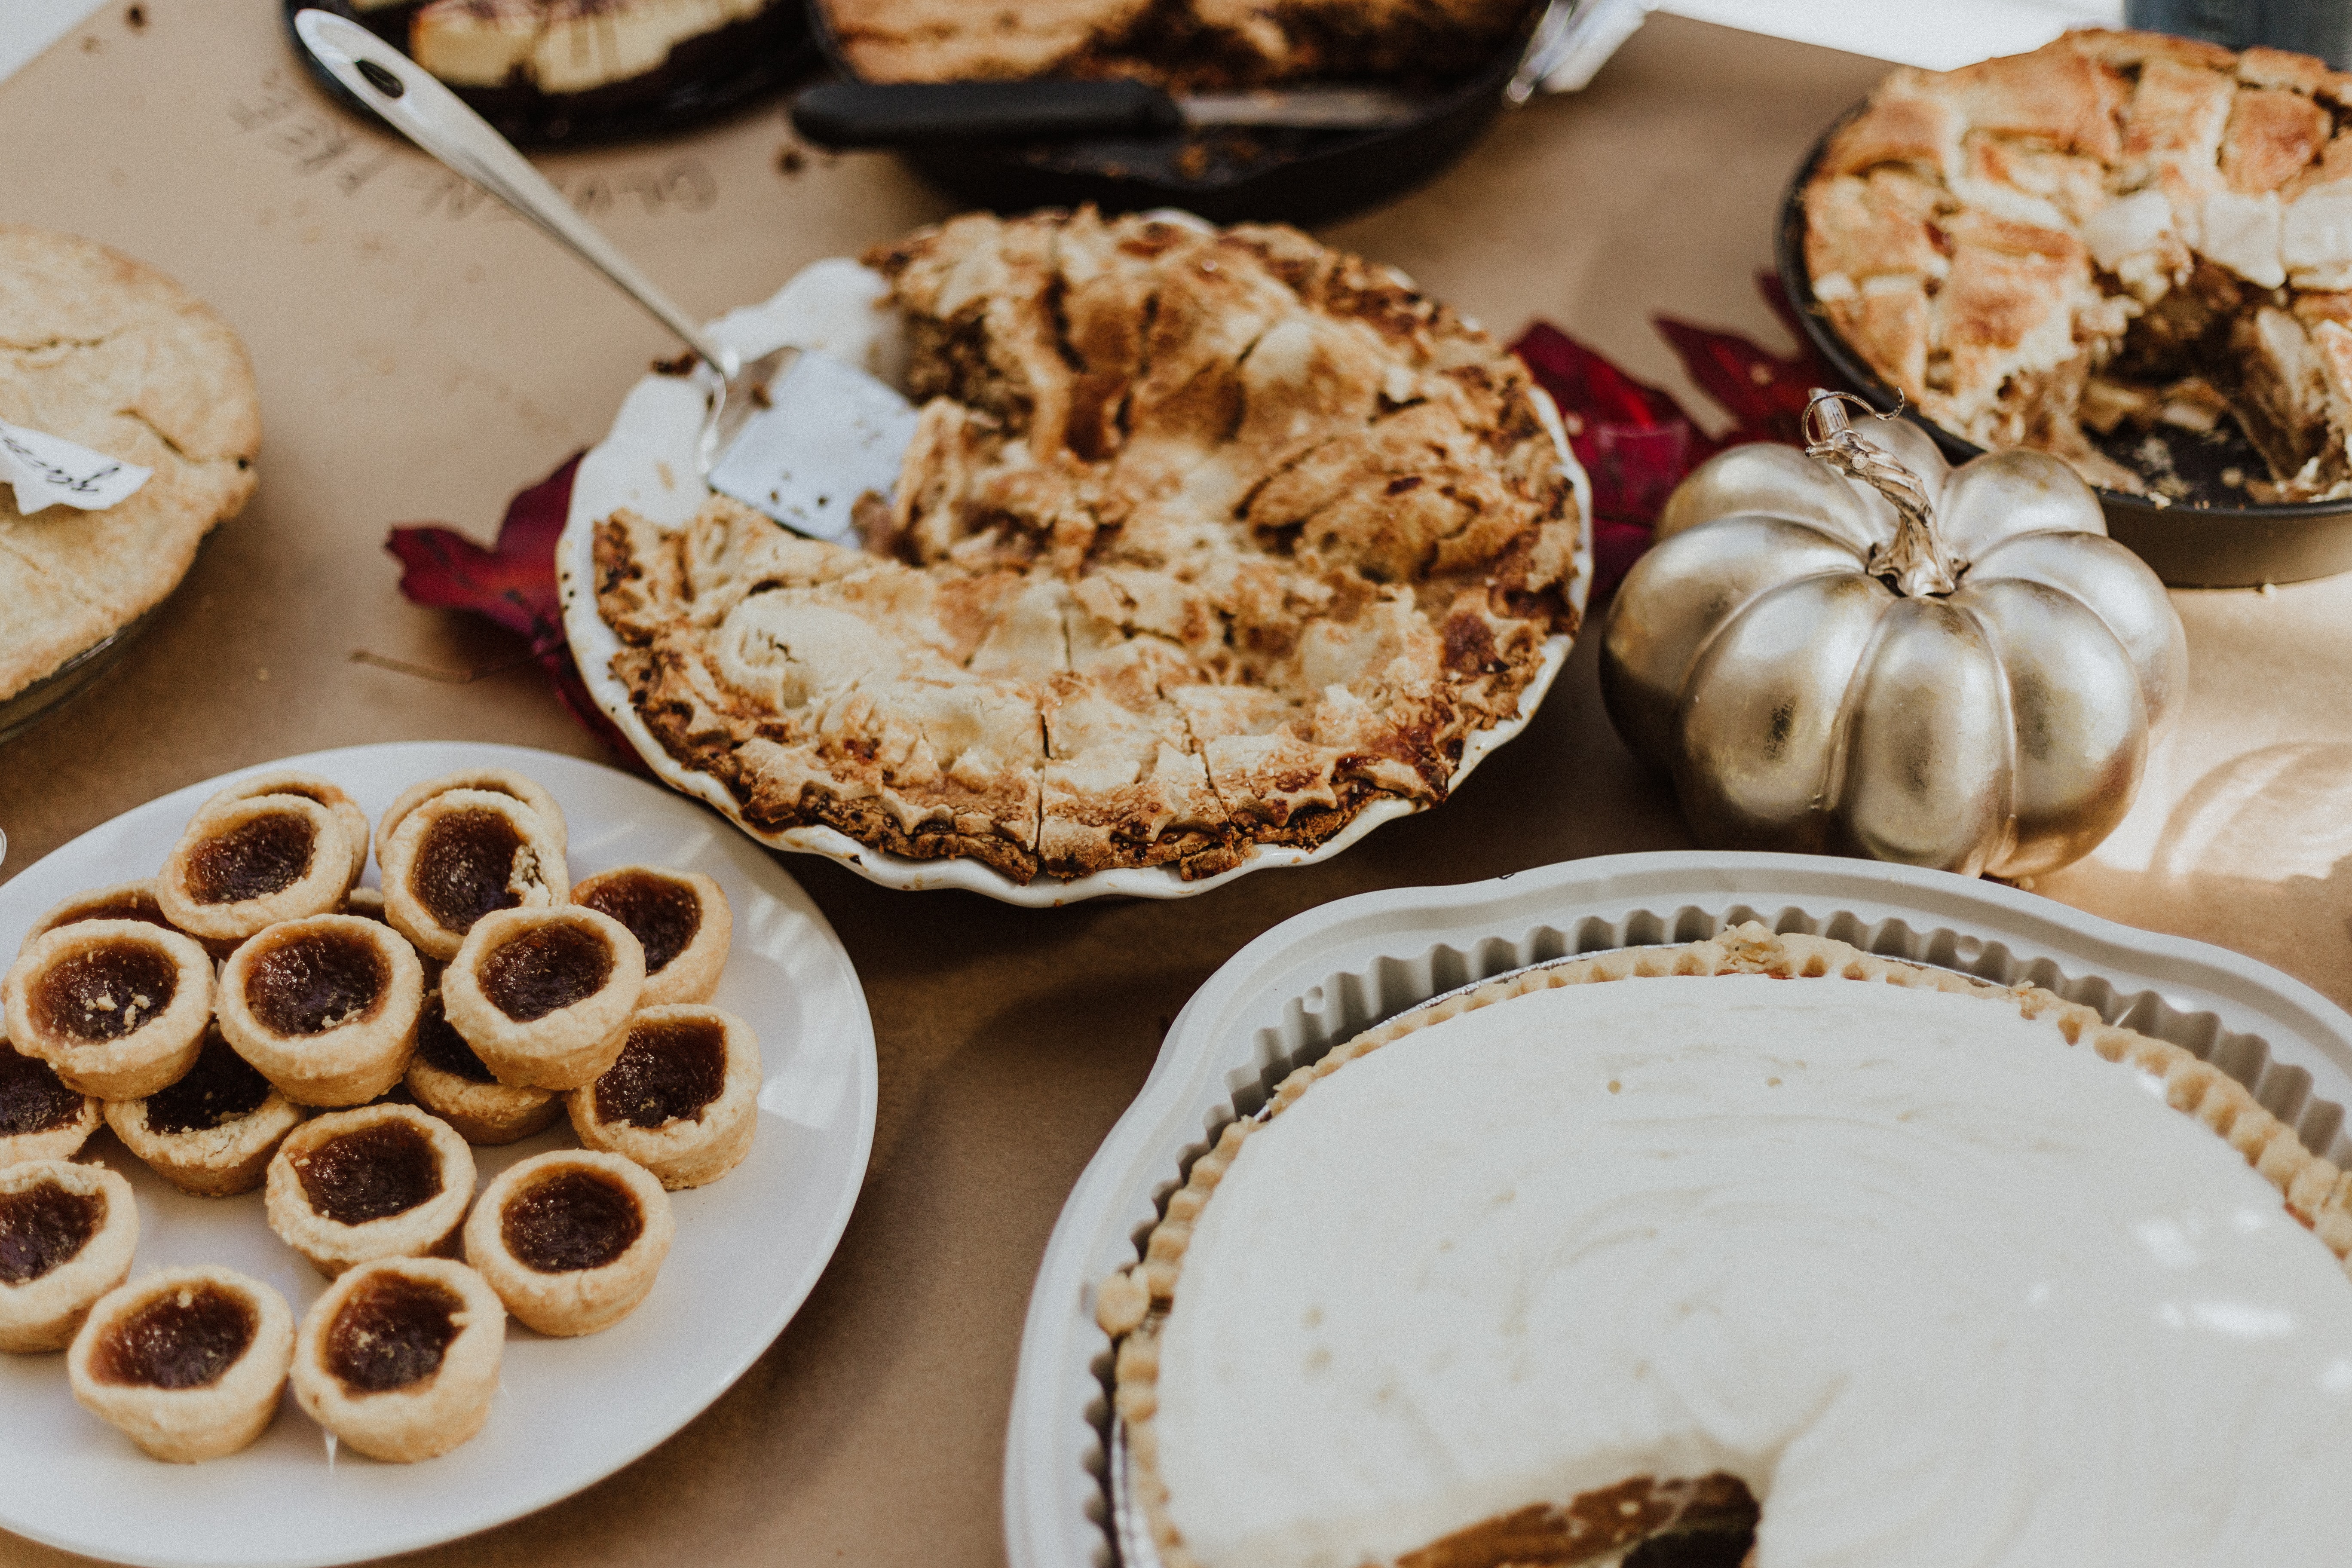 Things You Can Do At Home If You Are Alone on Thanksgiving